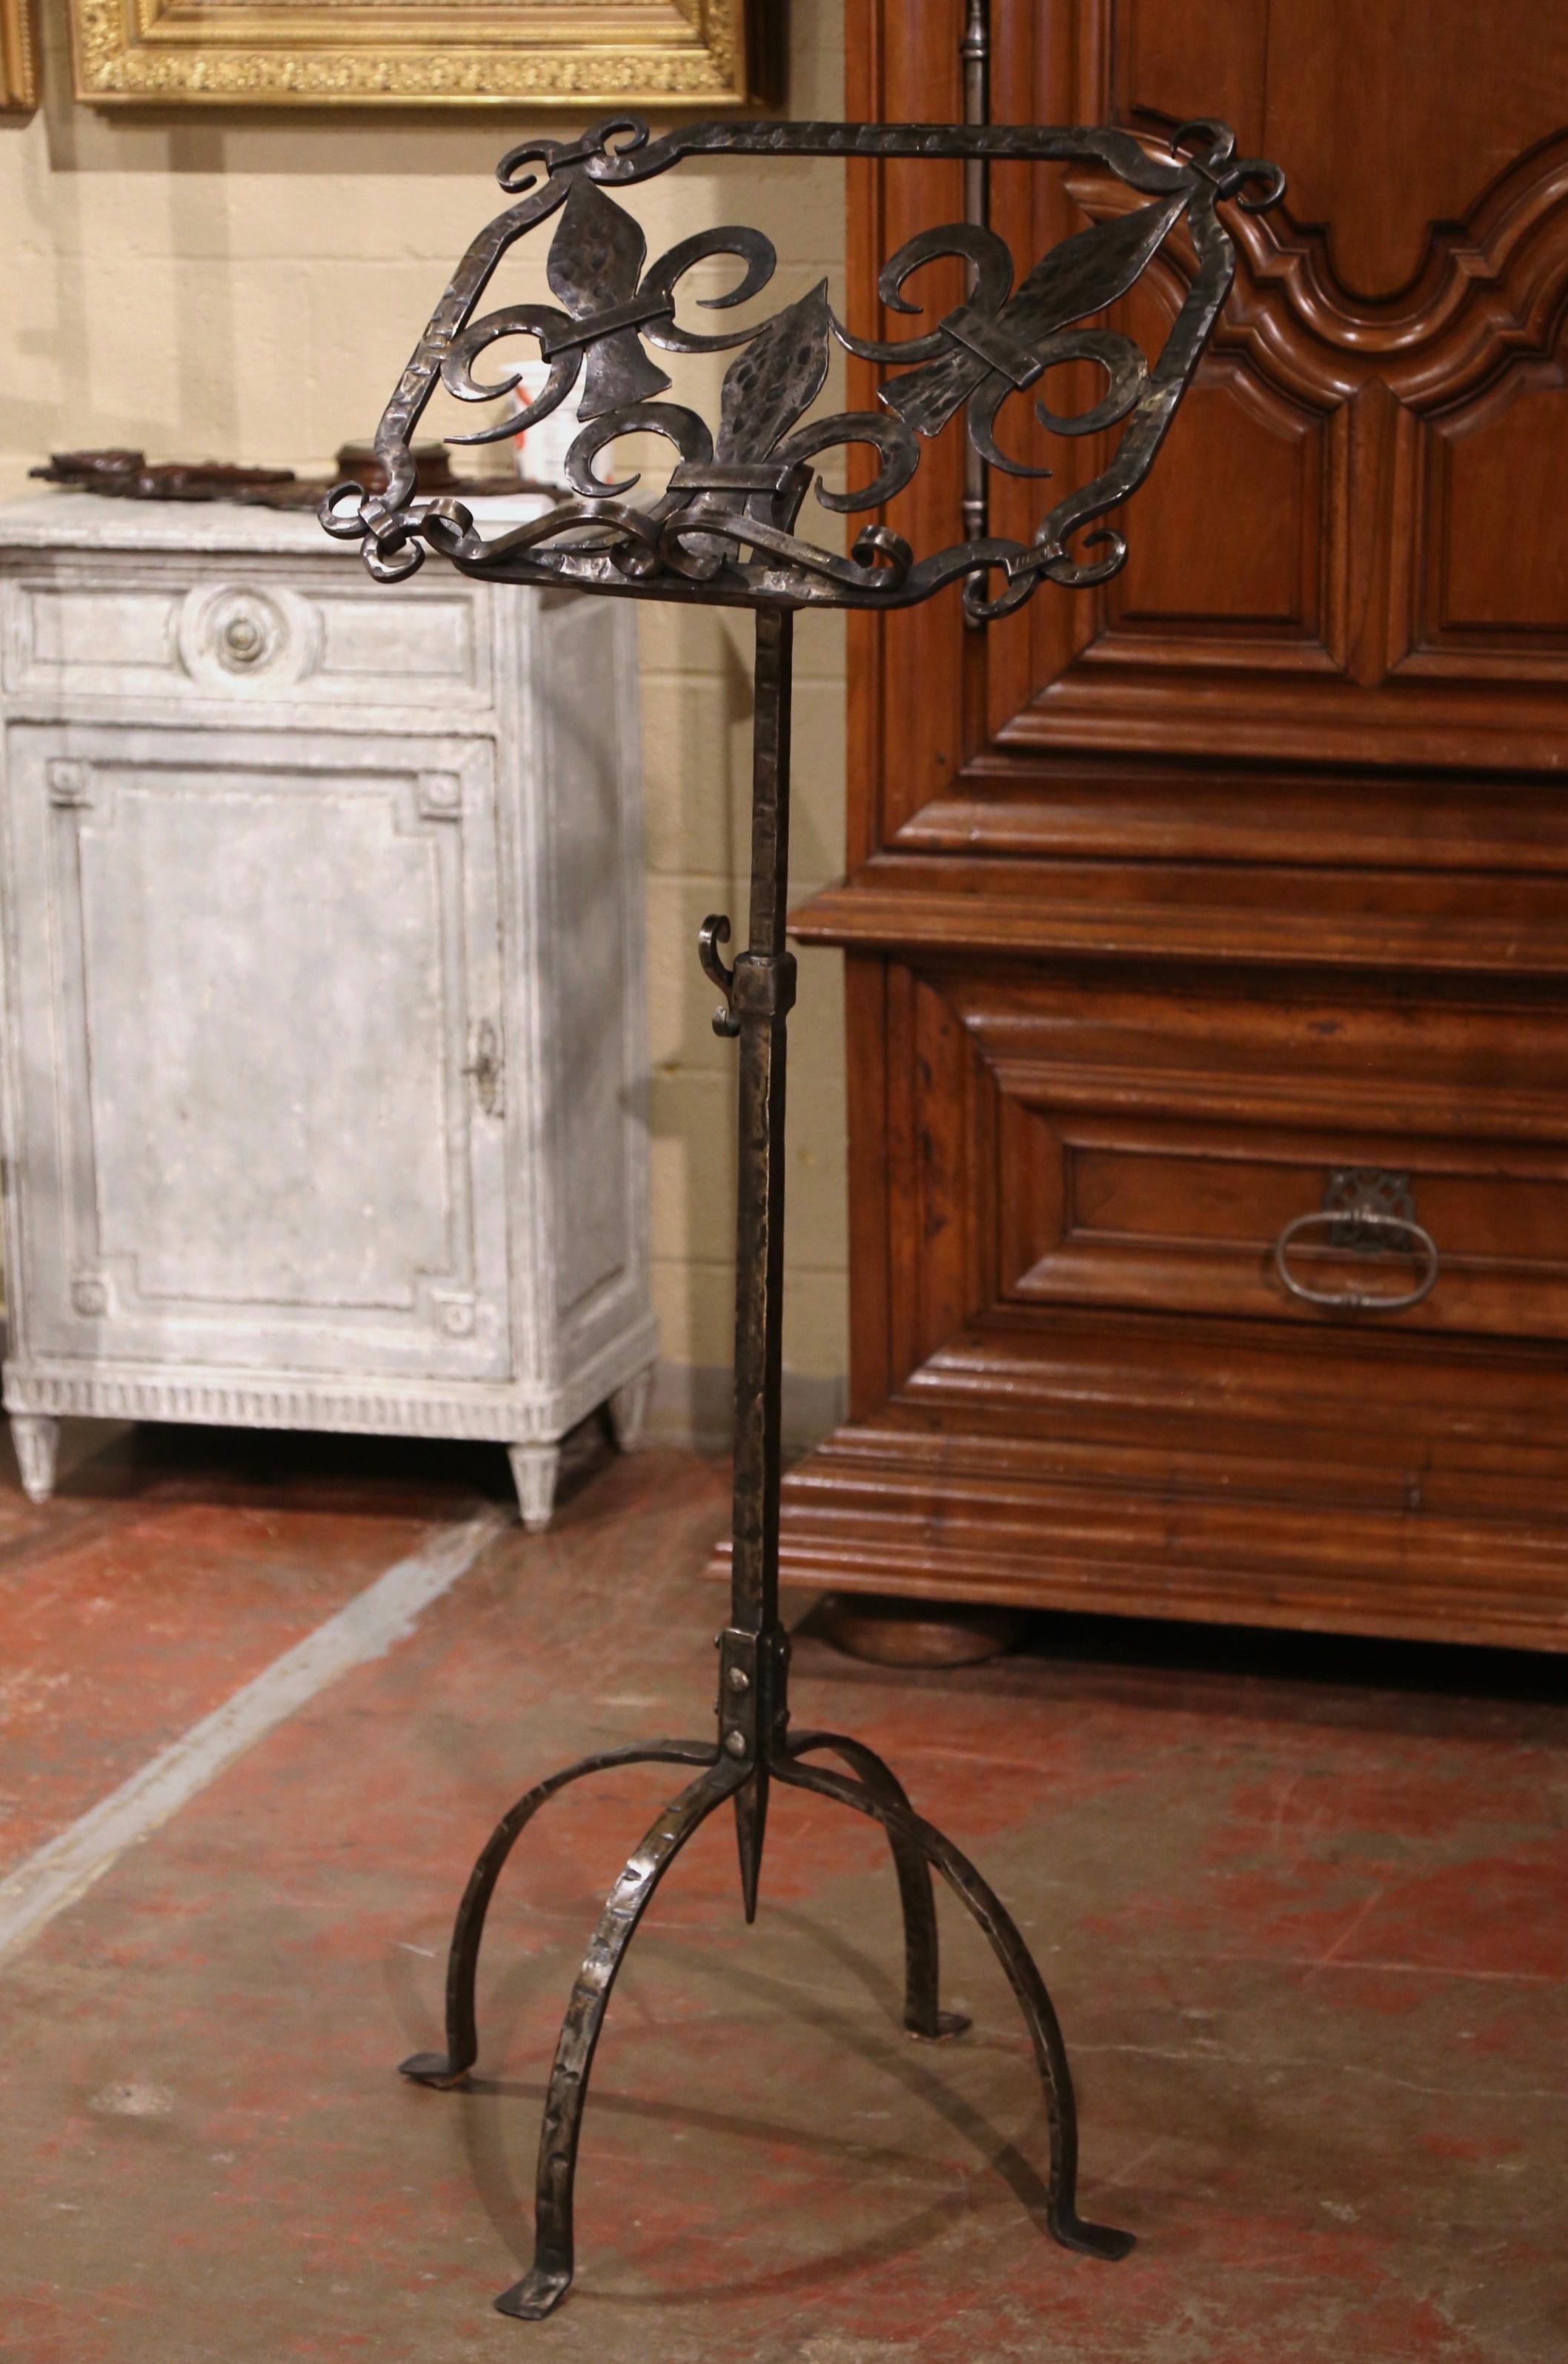 Wrought Iron  19th Century French Forged Iron Music Stand Lectern with Fleur-de-Lys Decor